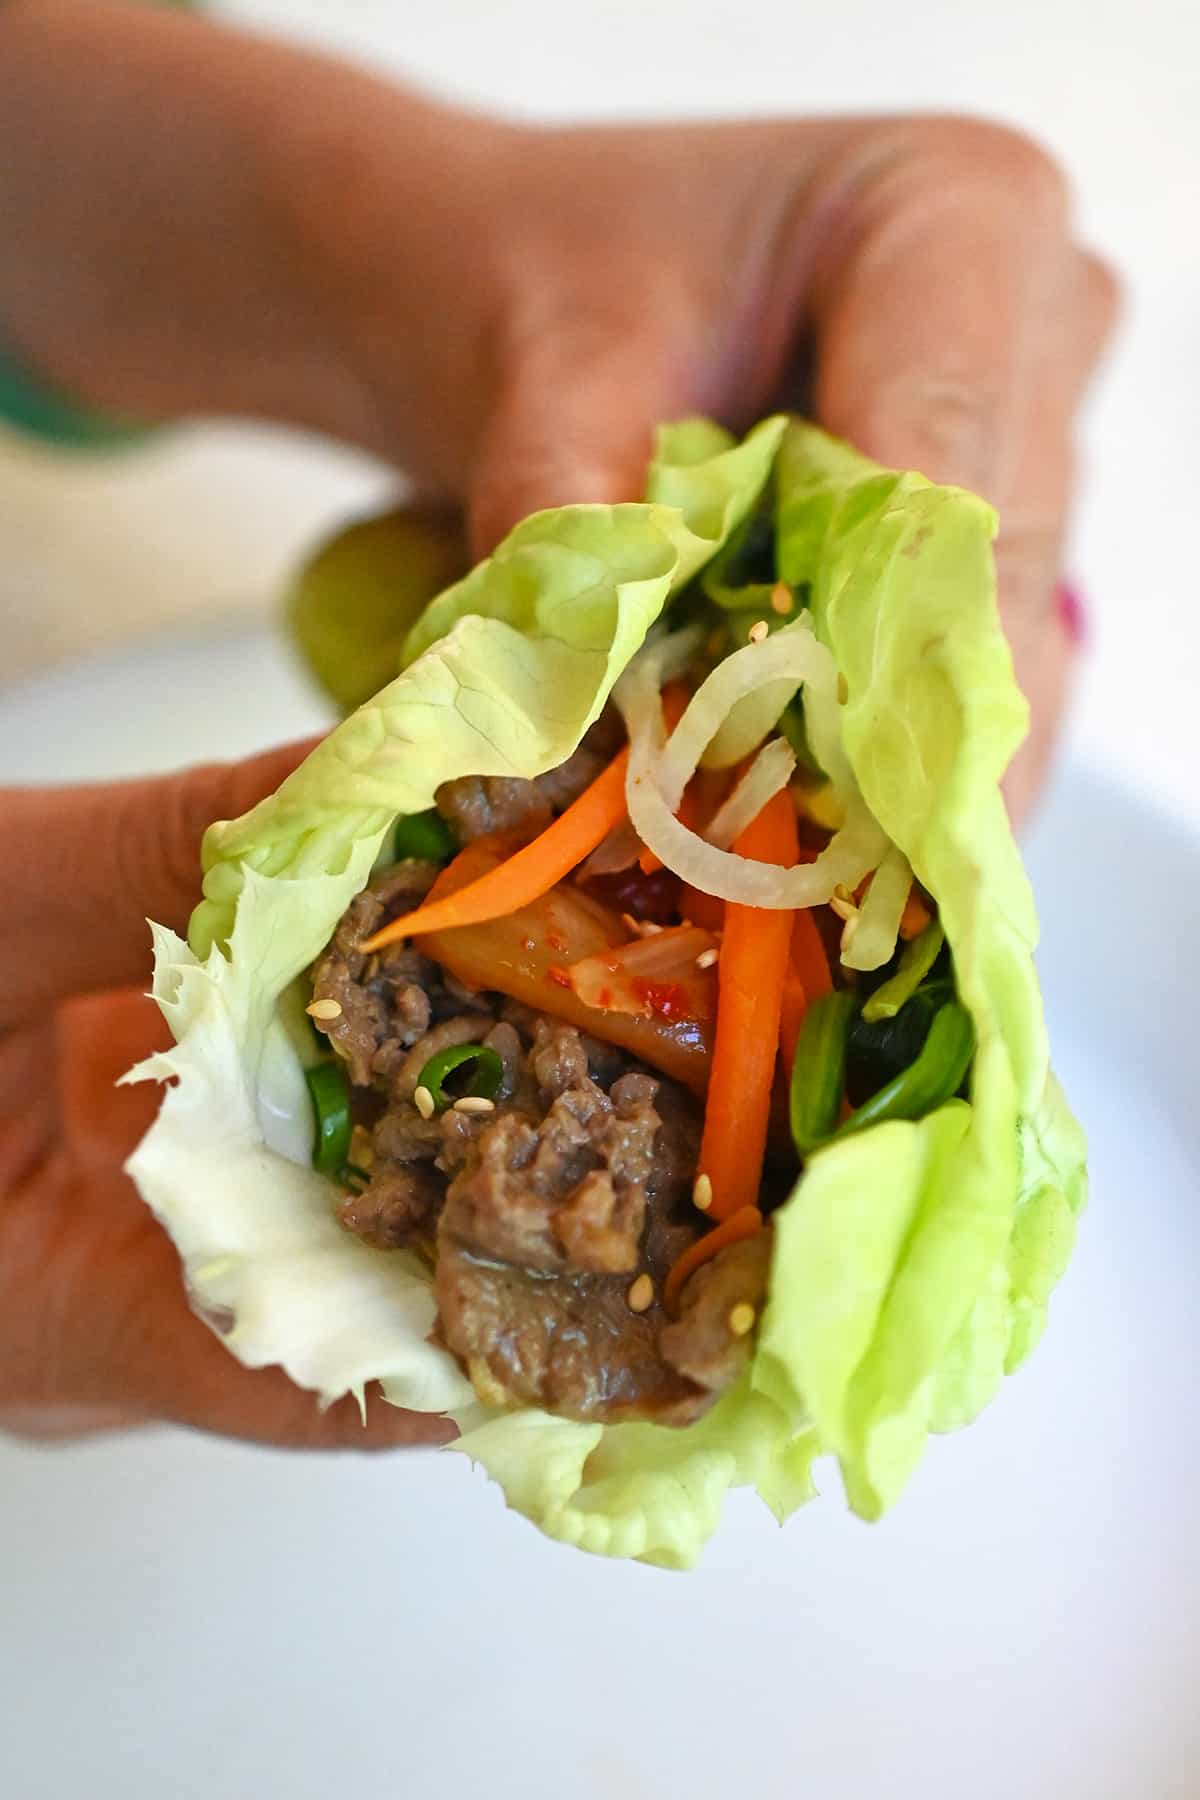 A closeup of a hand holding bulgogi and vegetables wrapped in a lettuce leaf.